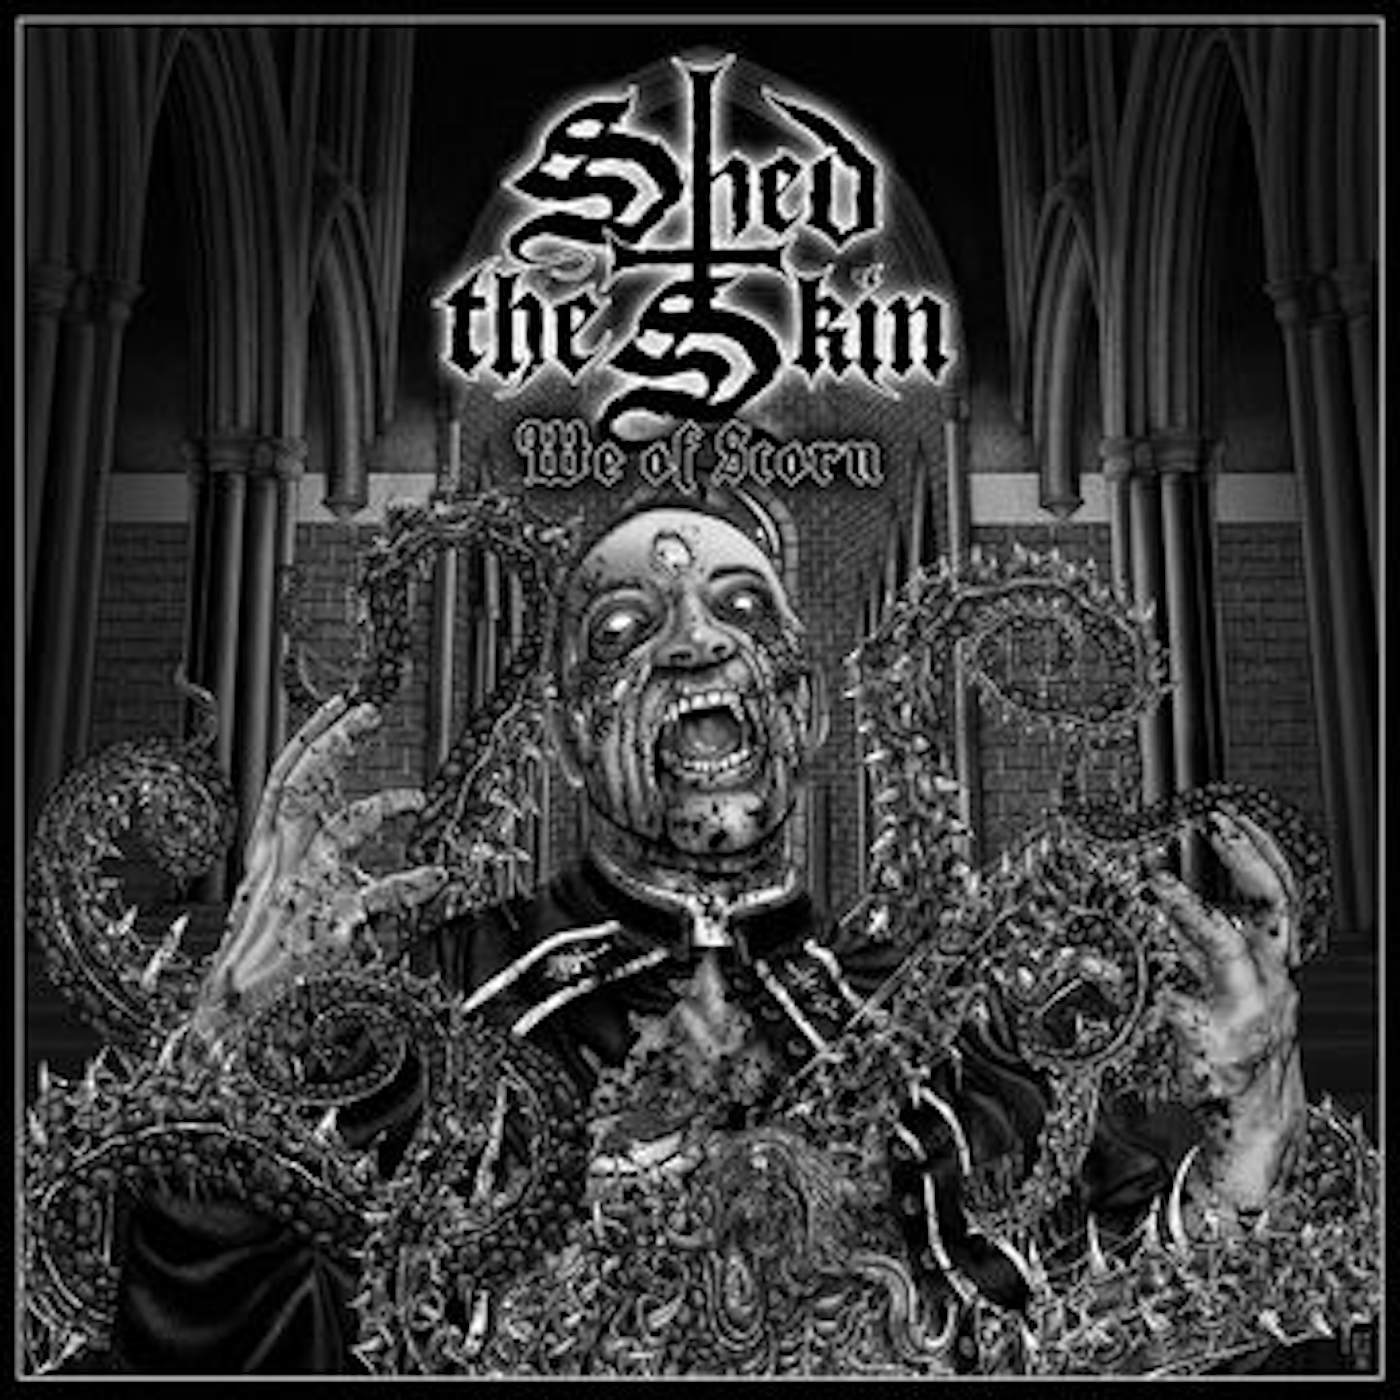 Shed the Skin We of Scorn Vinyl Record